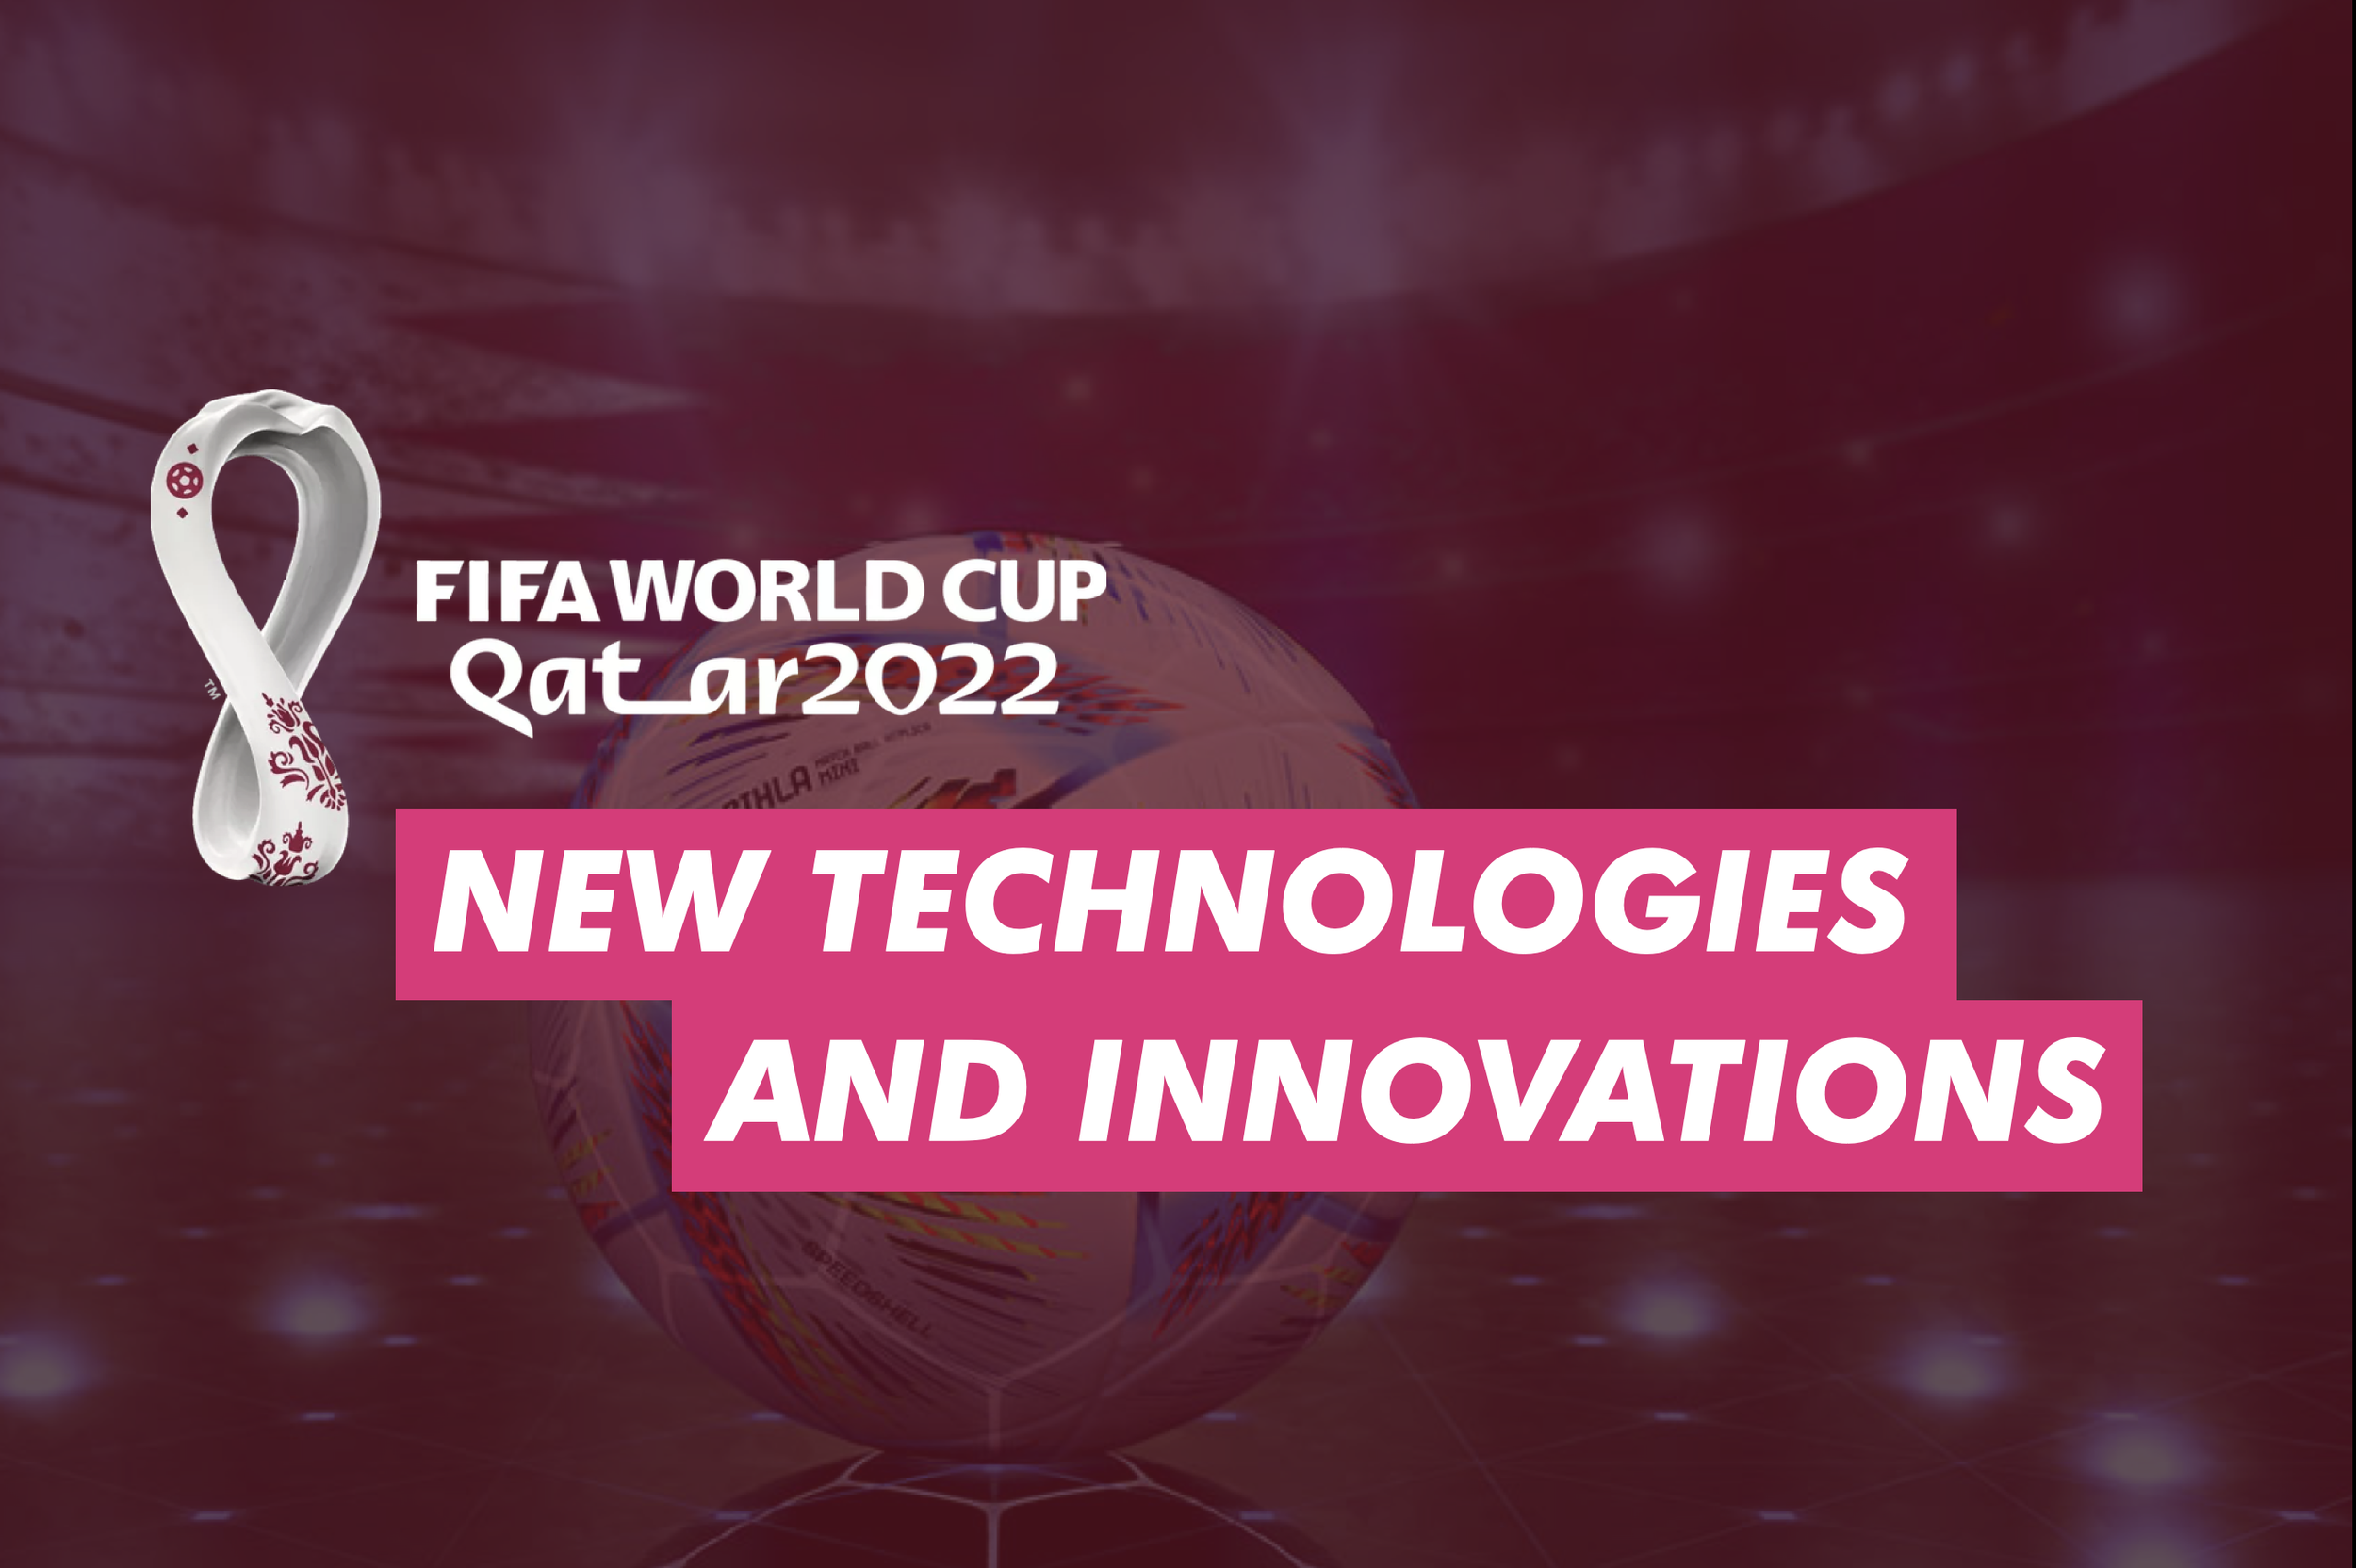 New technologies and Innovations introduced at the 2022 FIFA World Cup — LaSource